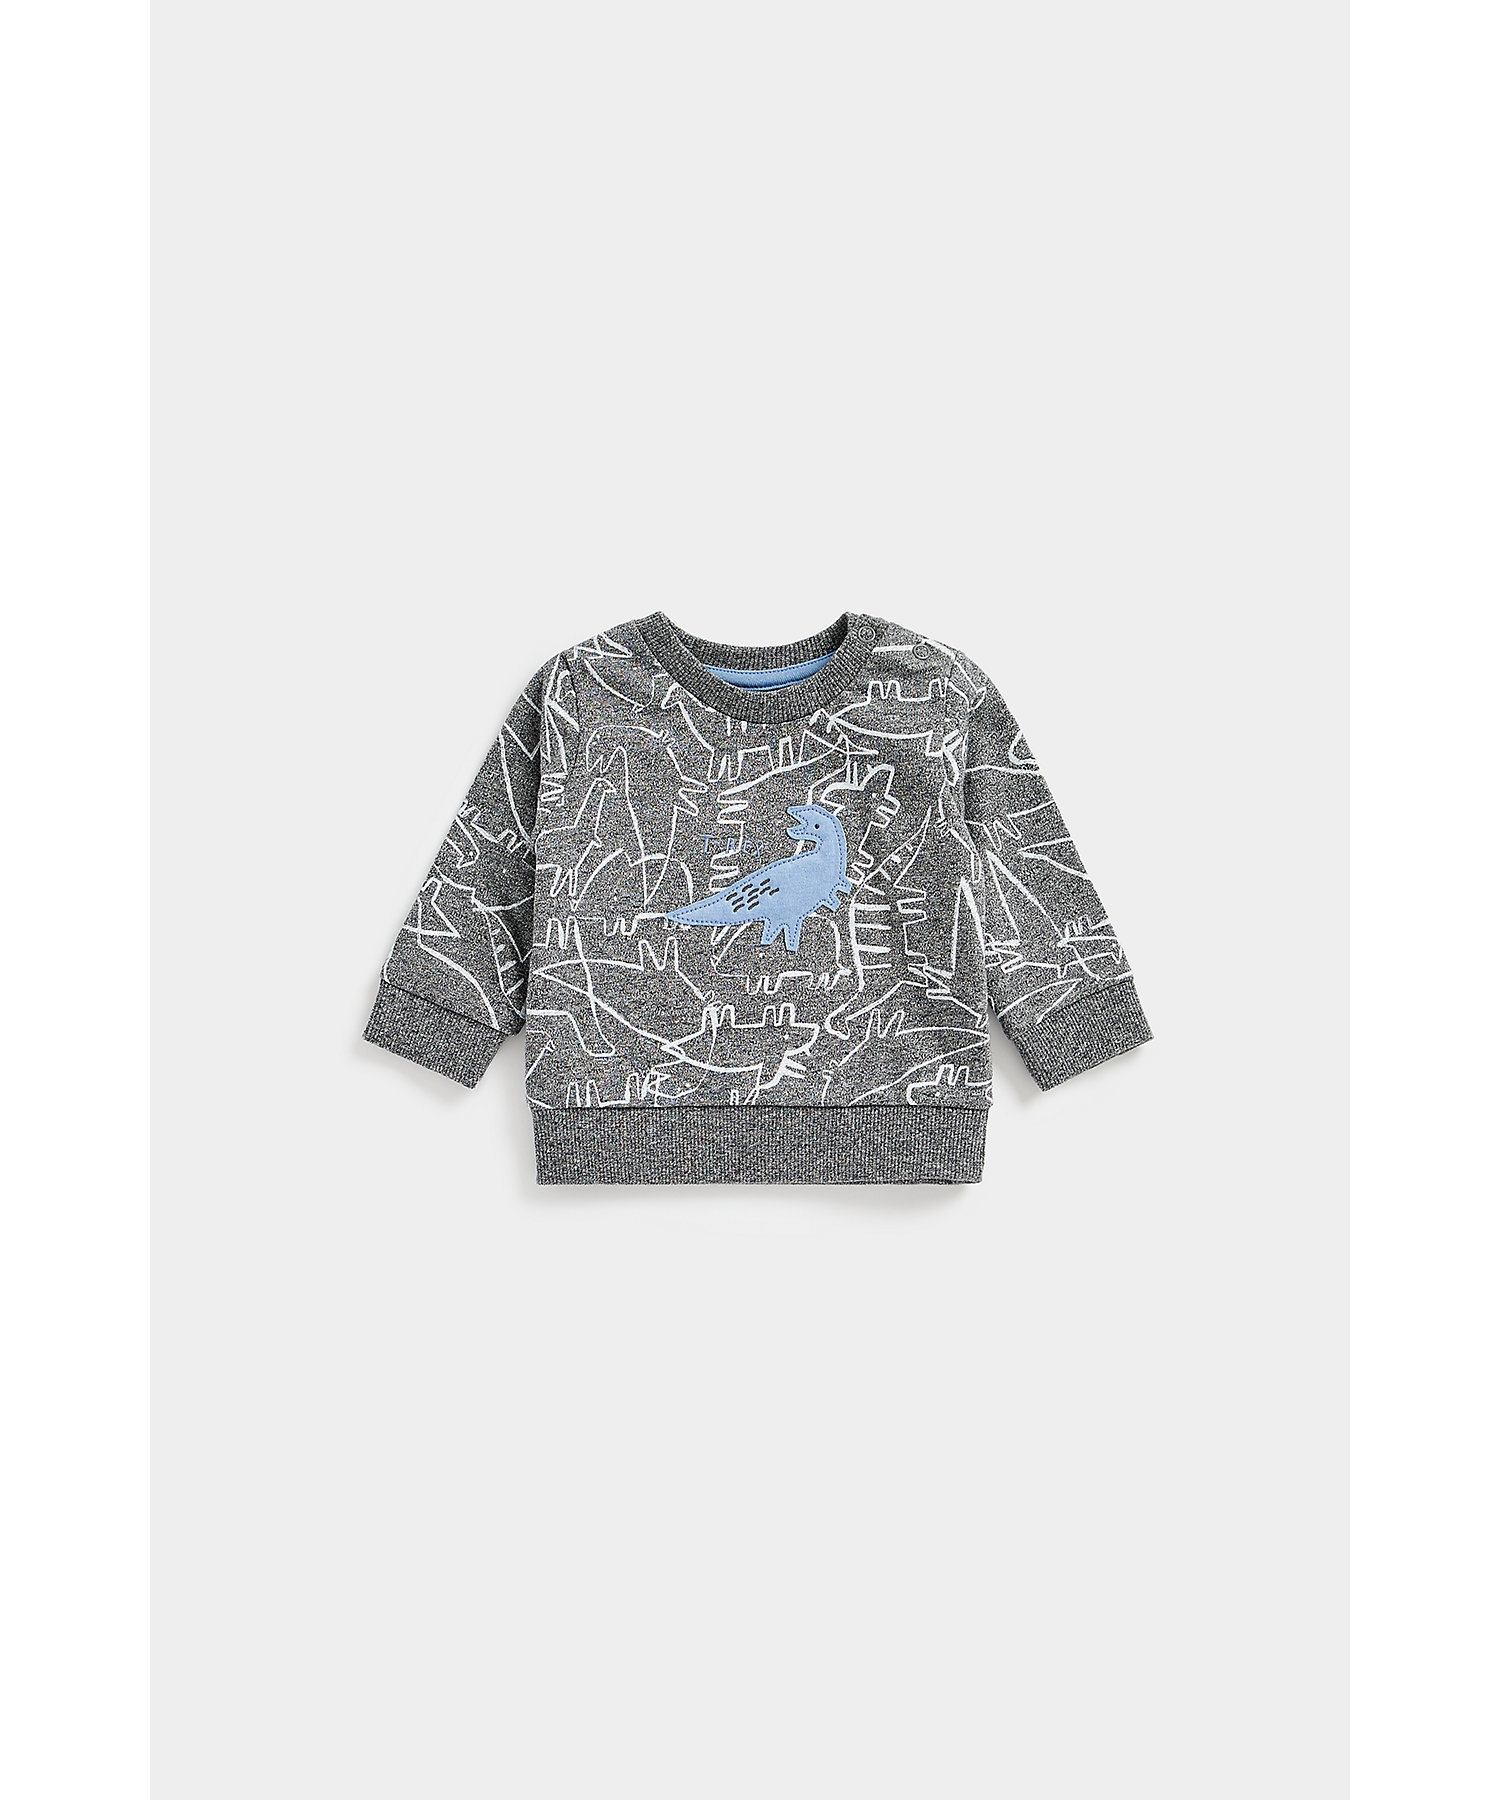 Mothercare | Boys Full Sleeves Sweaters -Pack of 1-Grey